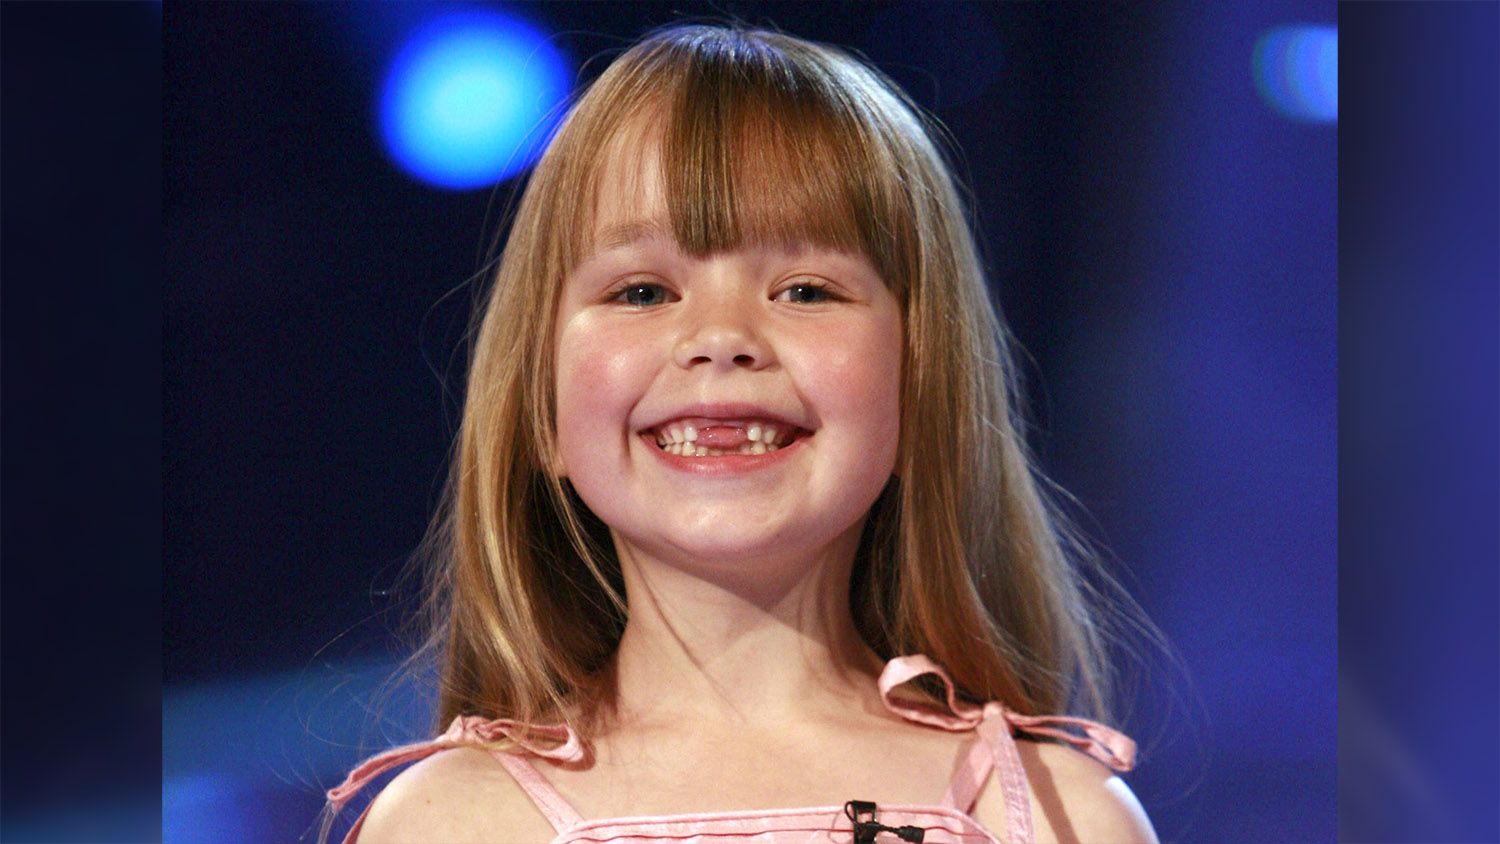 Connie Talbot - Over The Rainbow - Full Final Version Britain's